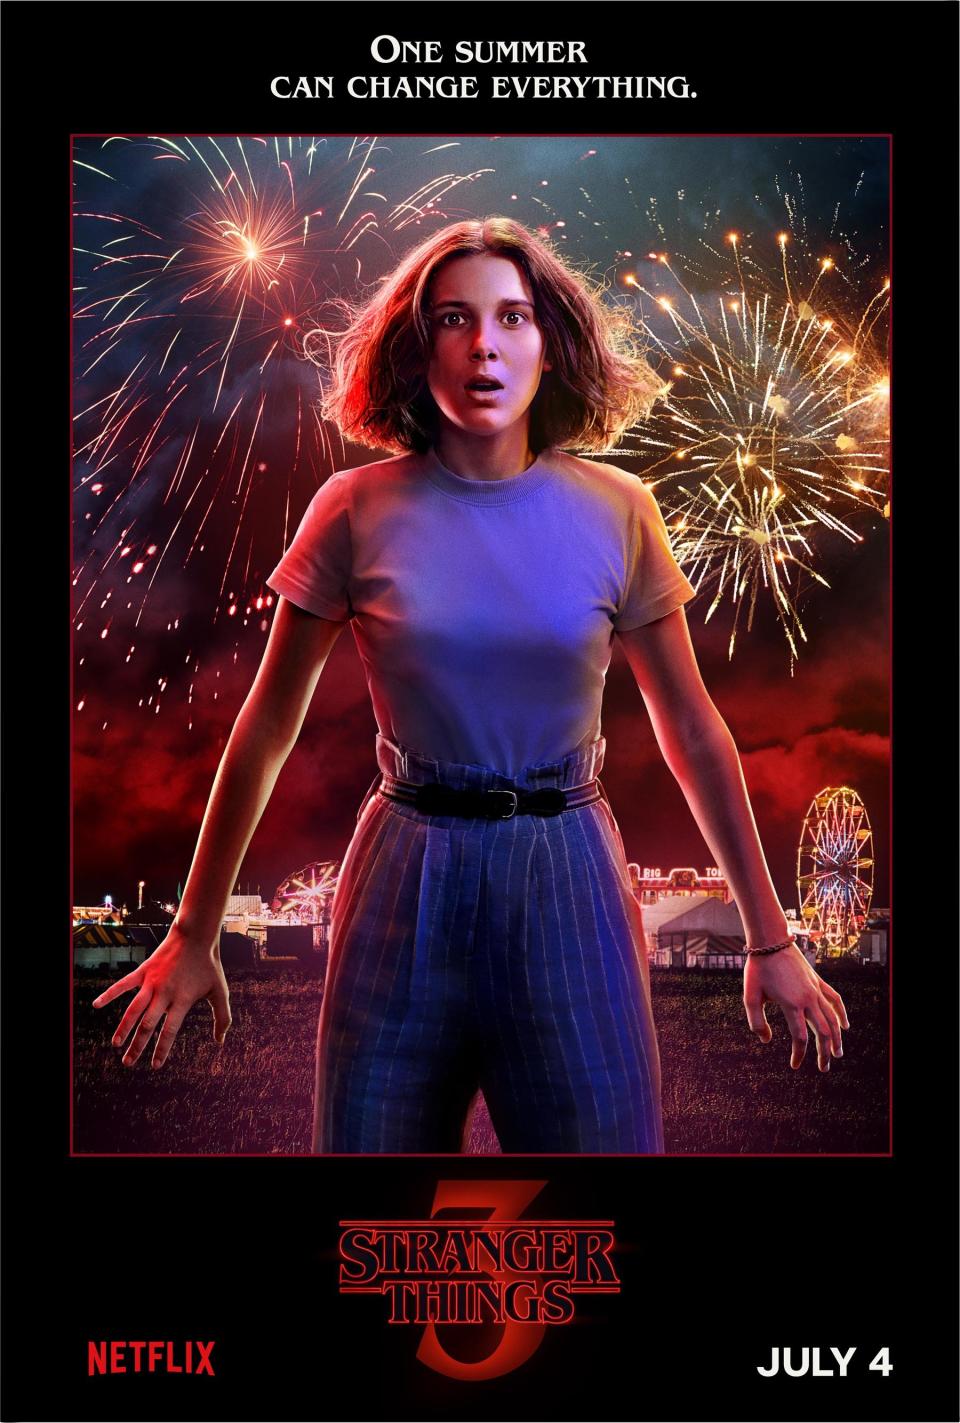 Stranger Things 3 debuts posters and scene from the premiere